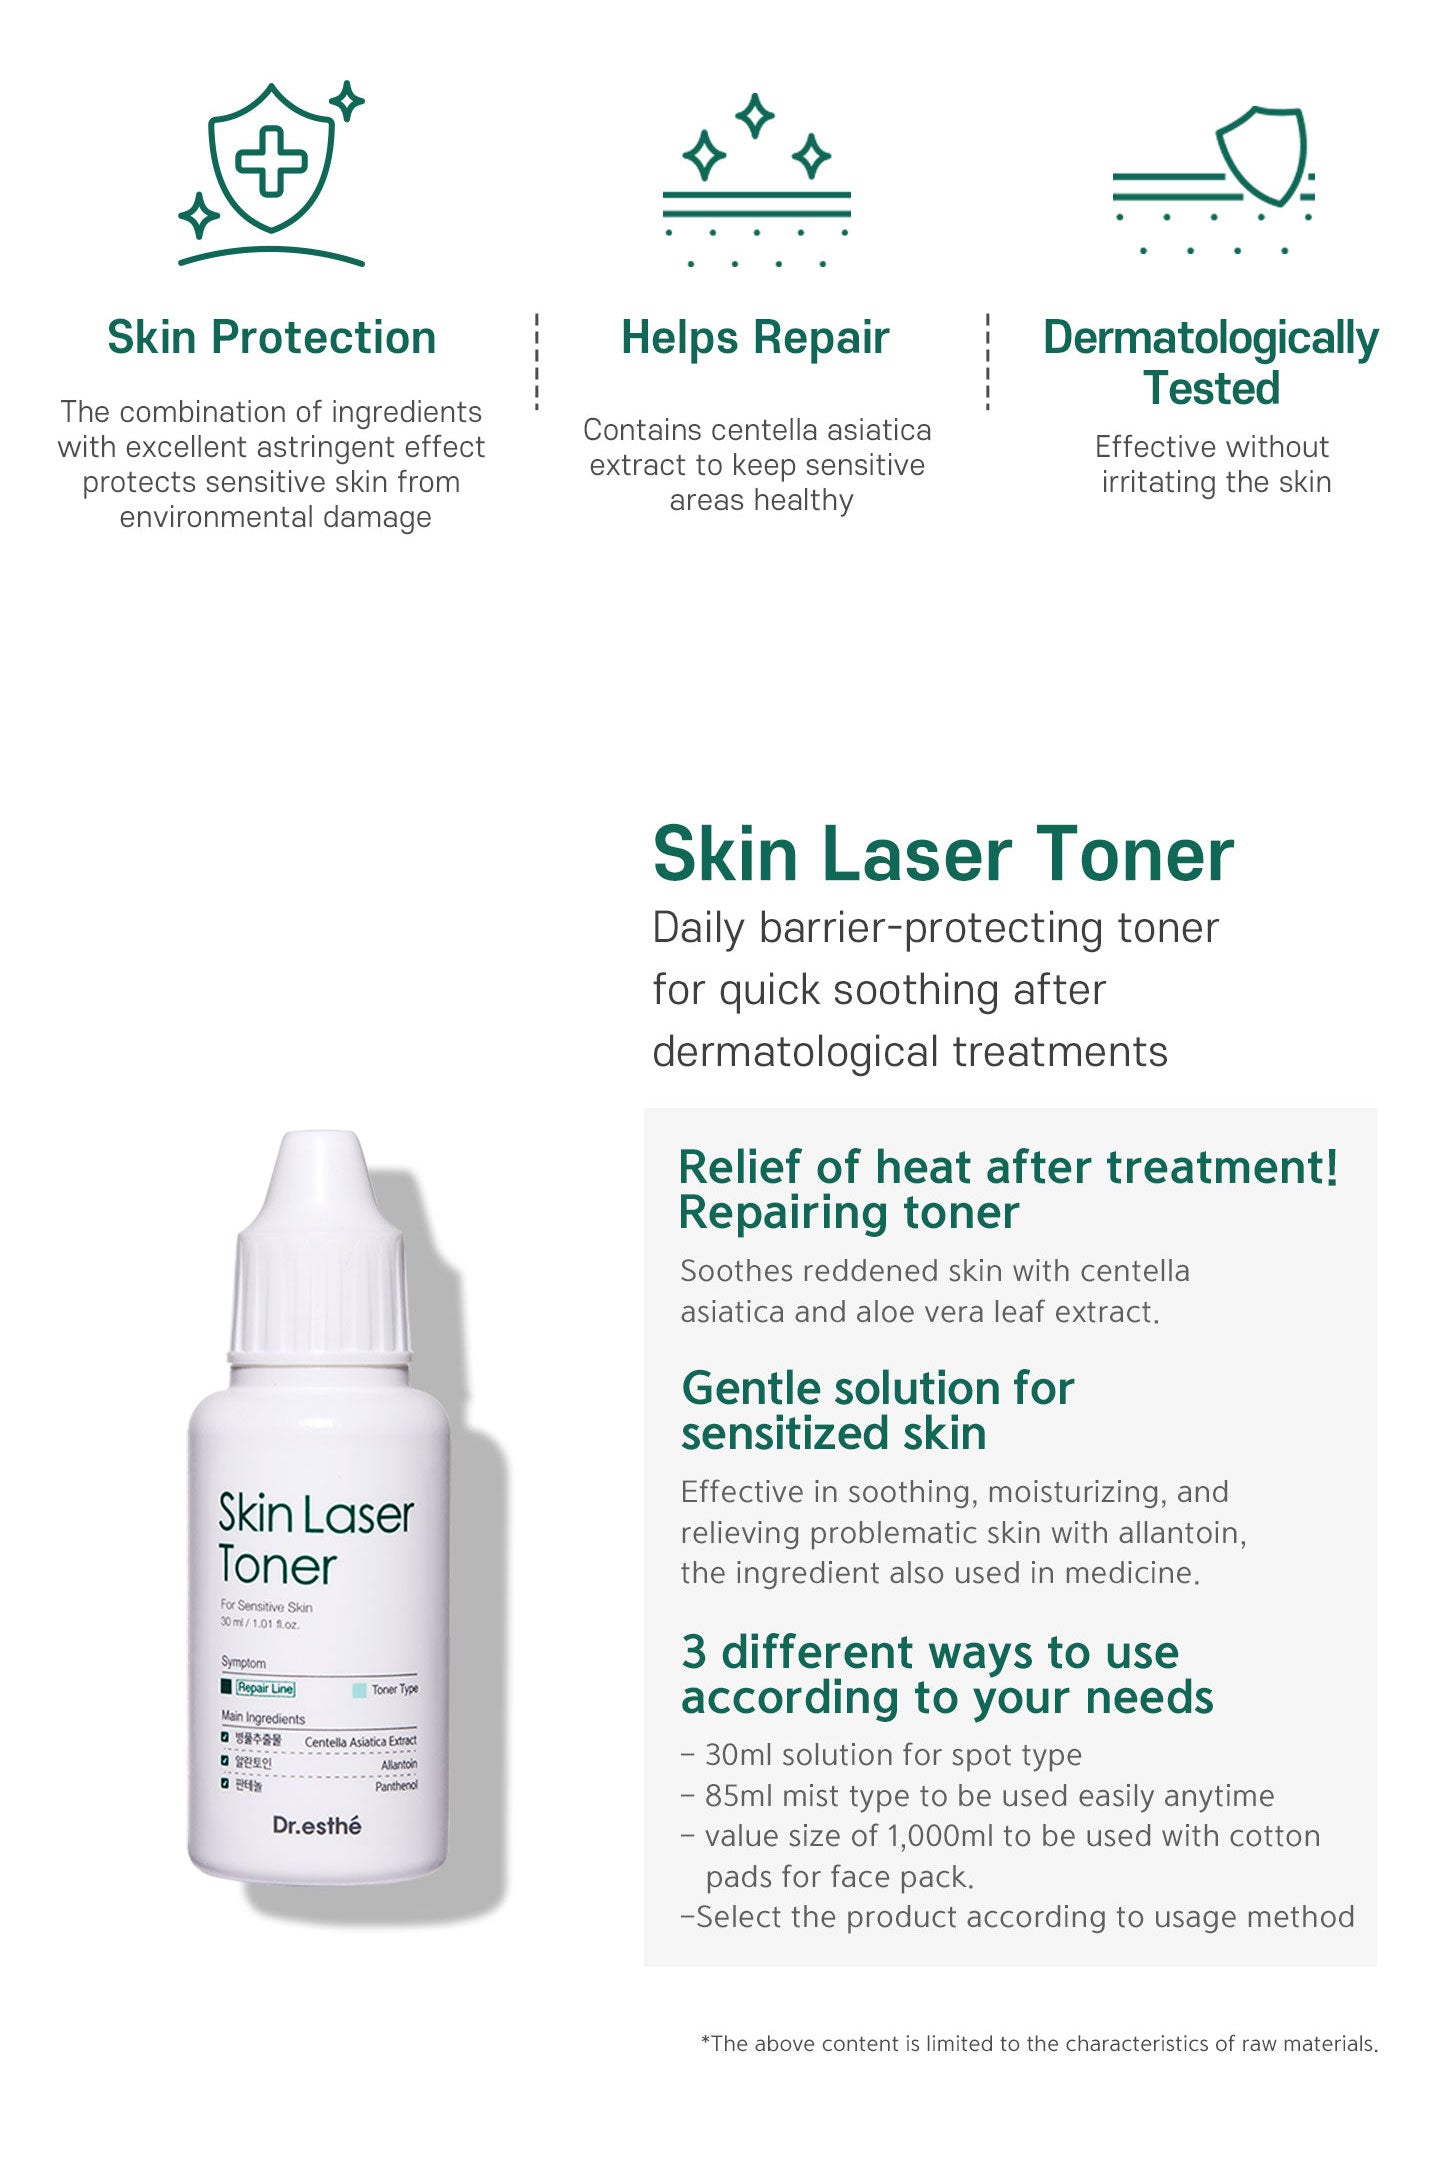 Skin laser toner relief the heat after treatment. Repairing toner. Gentle solution for sensitized skin. 3 different ways to use according to your needs. Dermatologically tested. 